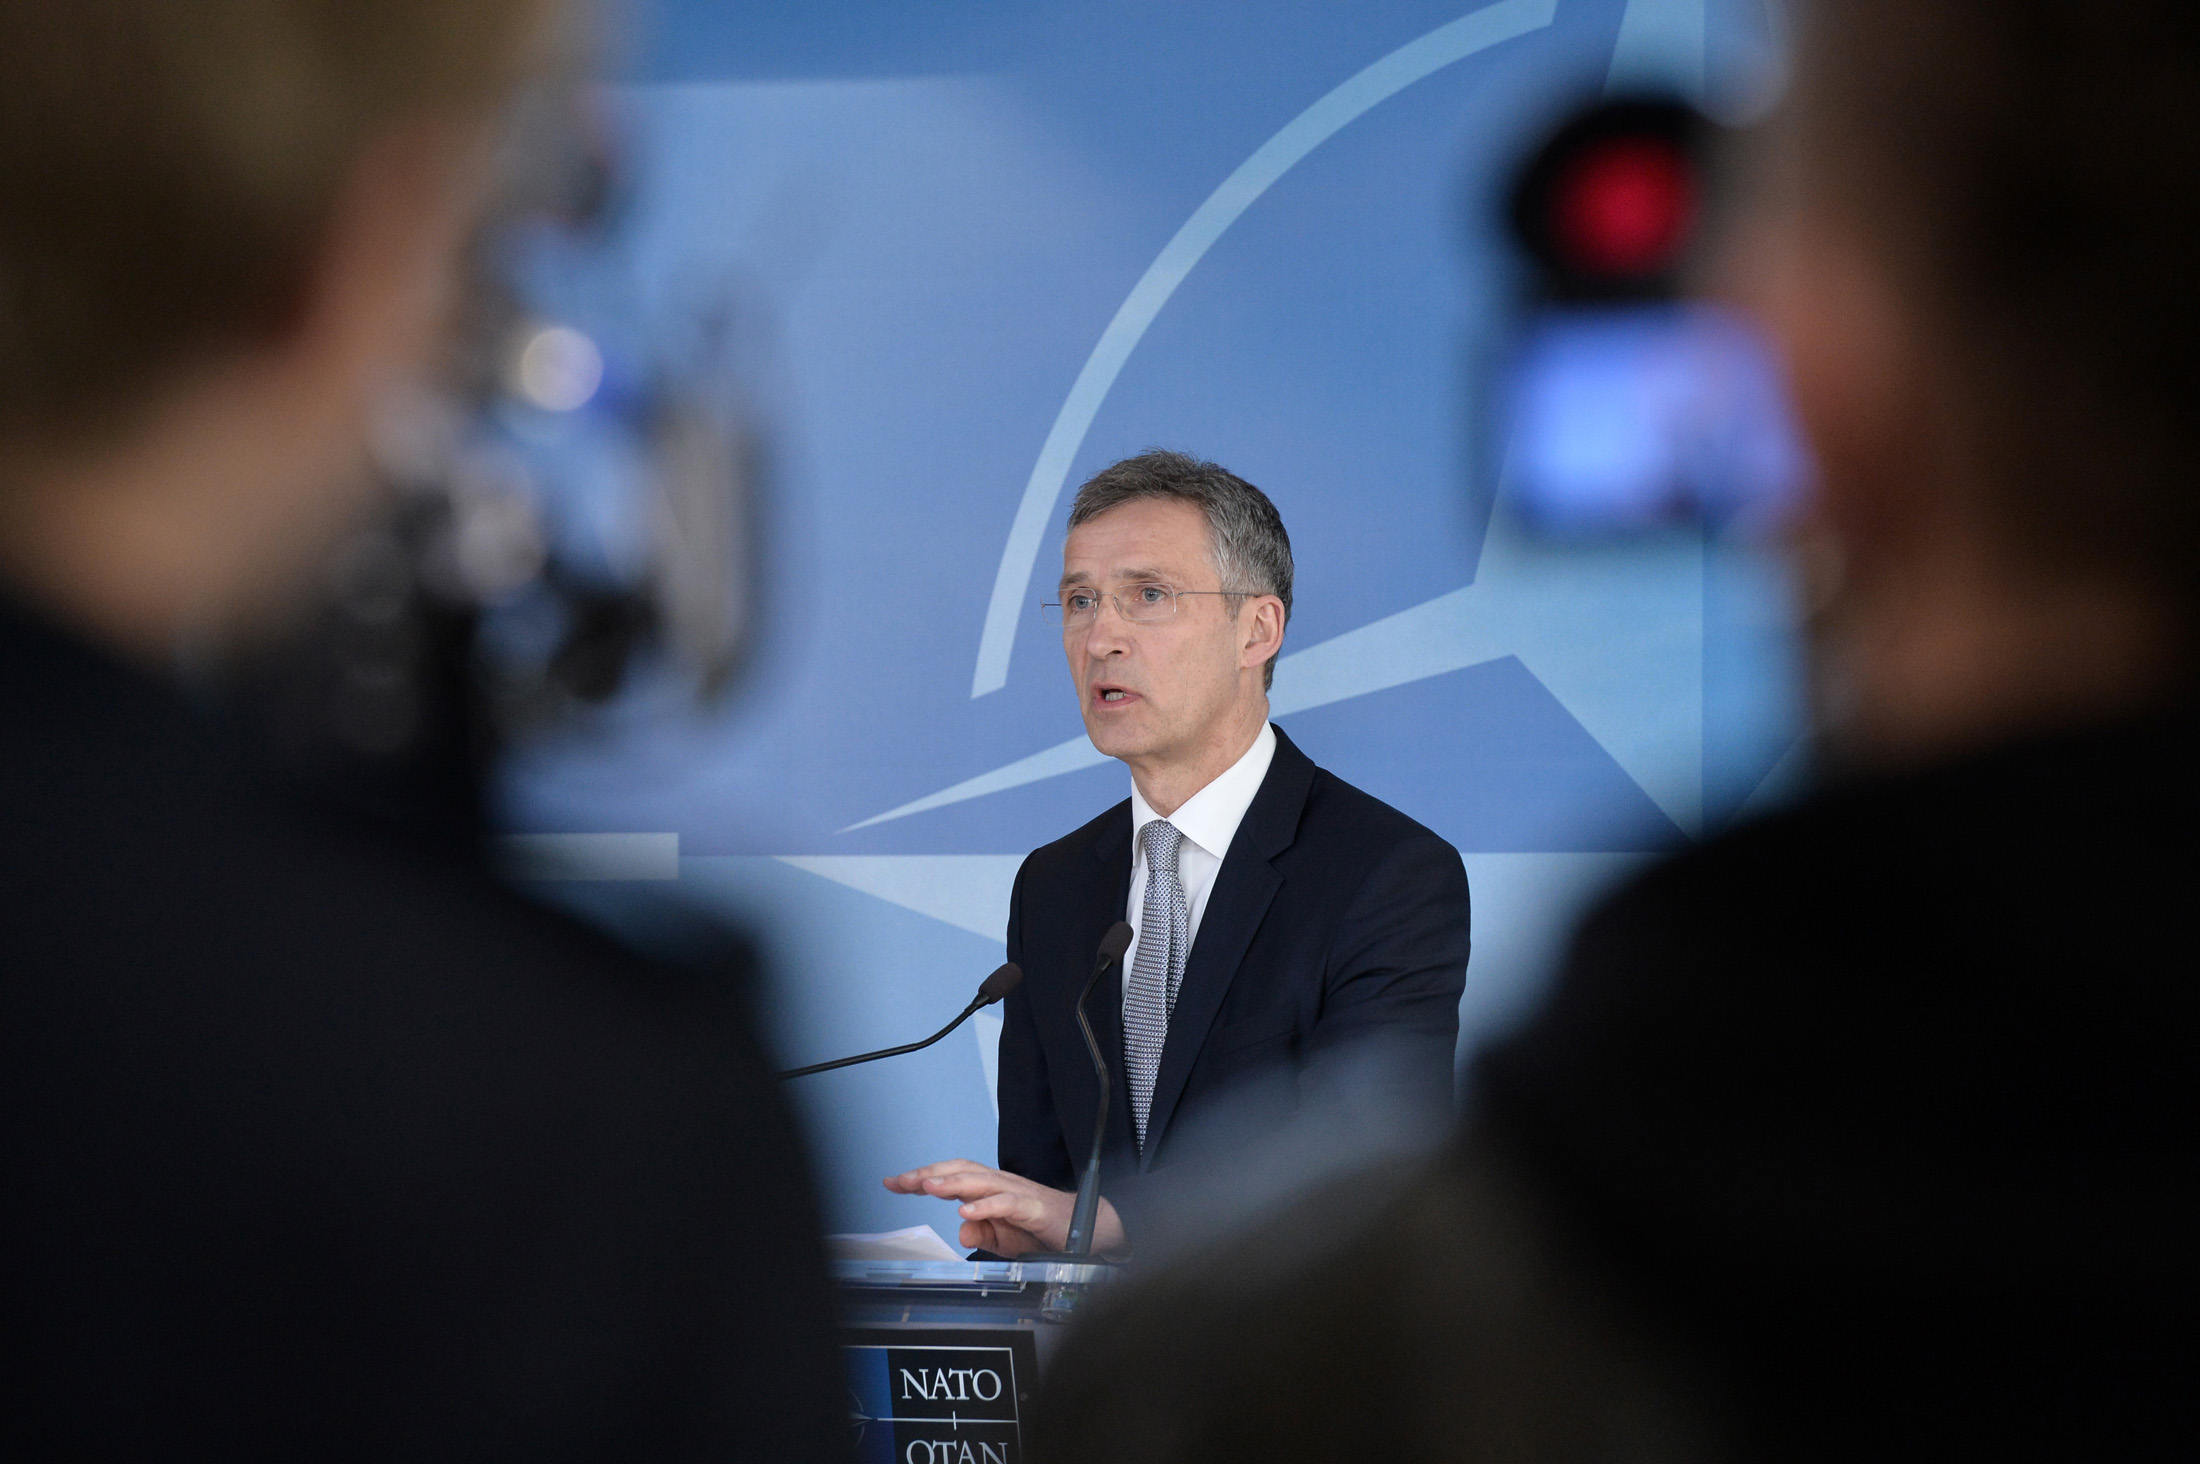 Press point by NATO Secretary General Jens Stoltenberg following the NATO-Russia Council meeting